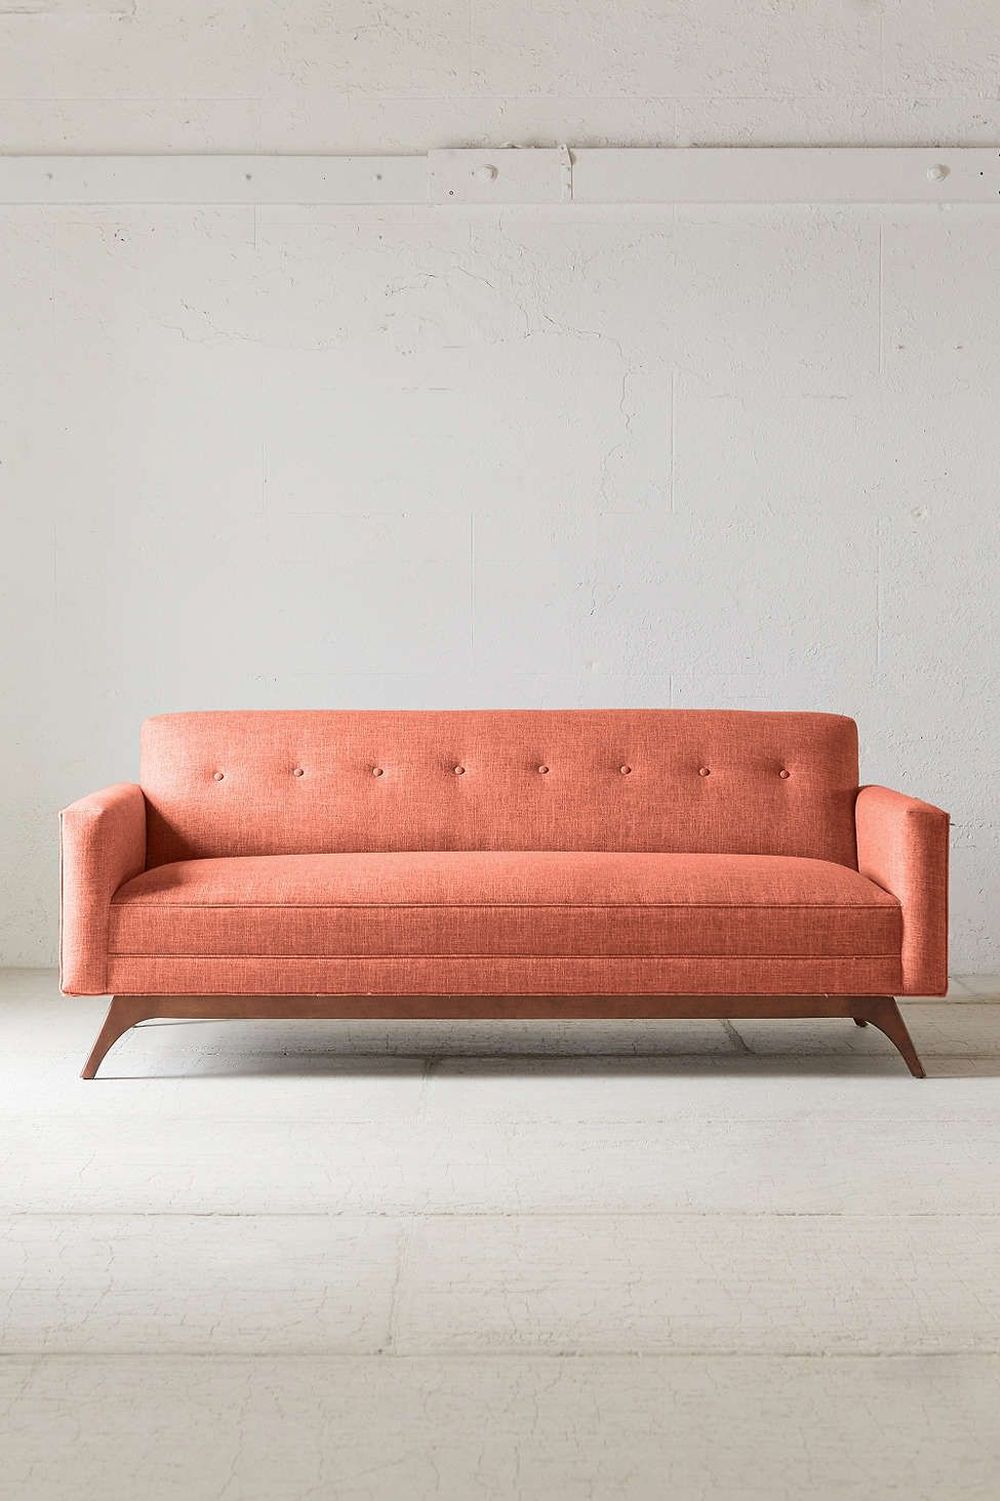 fresh orange sofa design the great seating debate about sofa versus couch: which one is better